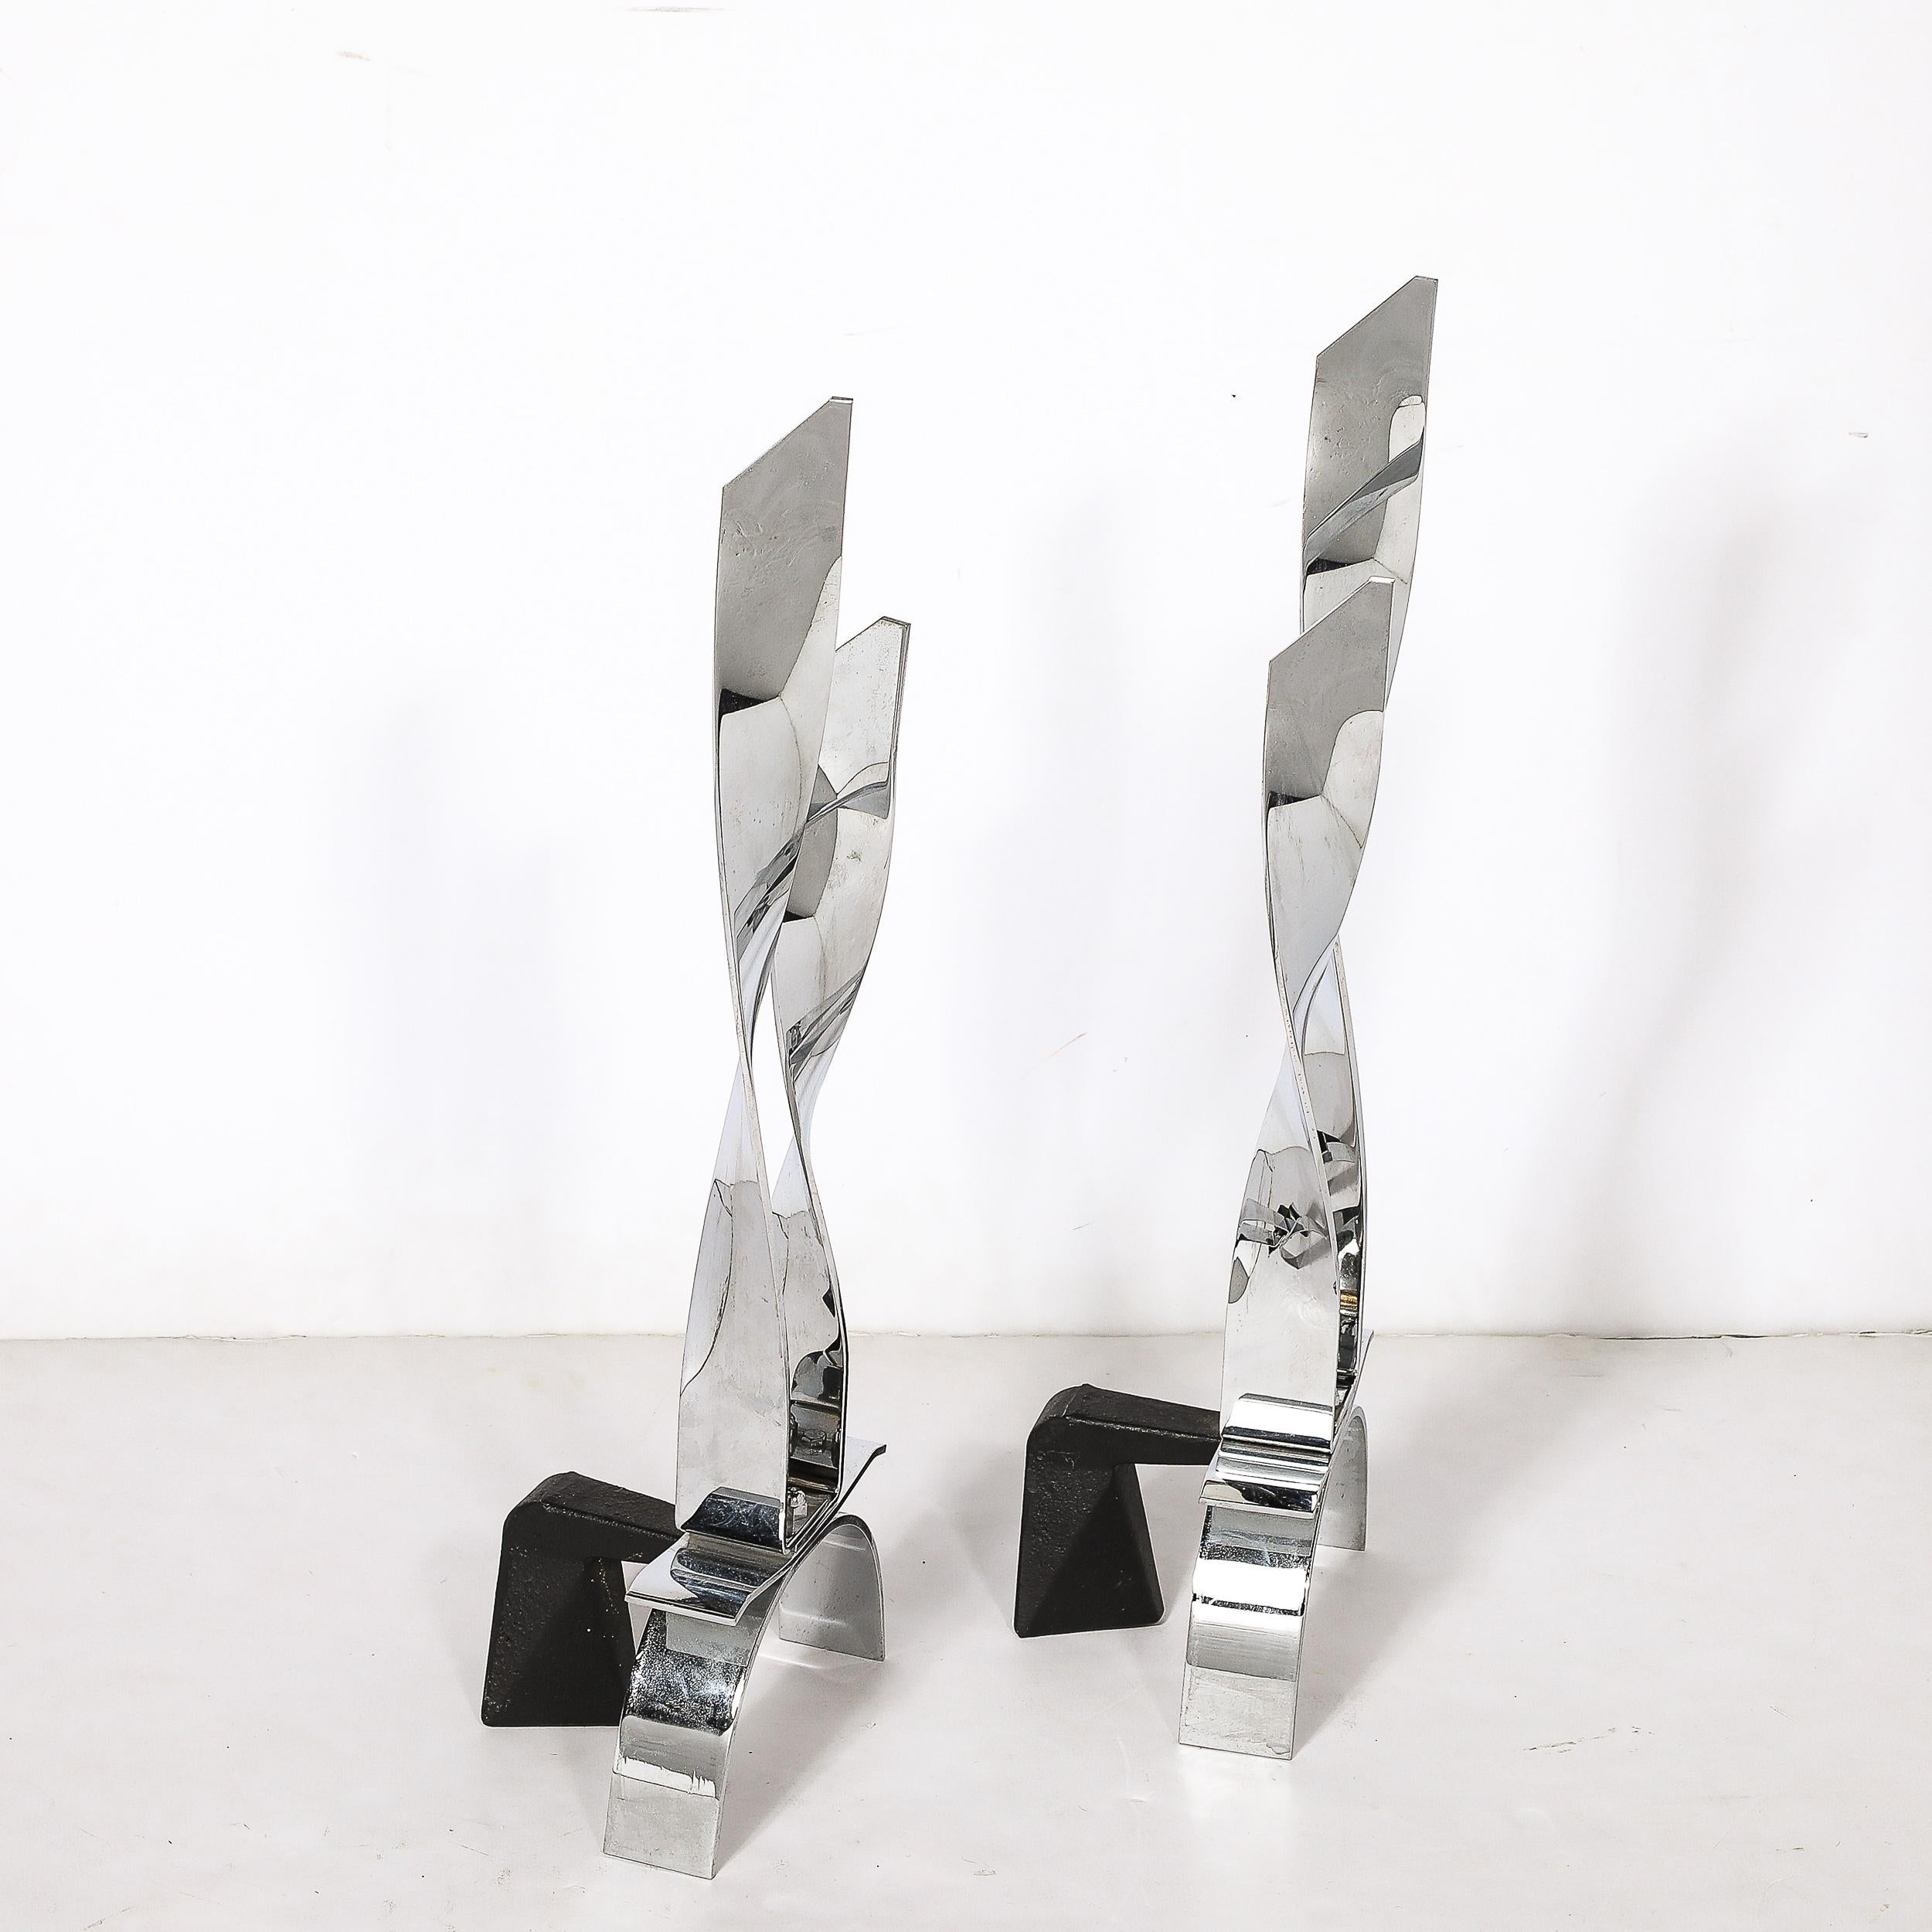 This bold and elegant Pair of Mid-Century Modernist Torqued Flame Andirons in Polished Chrome originate from the United States, Circa 1970. Features a dynamic minimal composition rendered in polished chrome bands, beautifully twisted to resemble